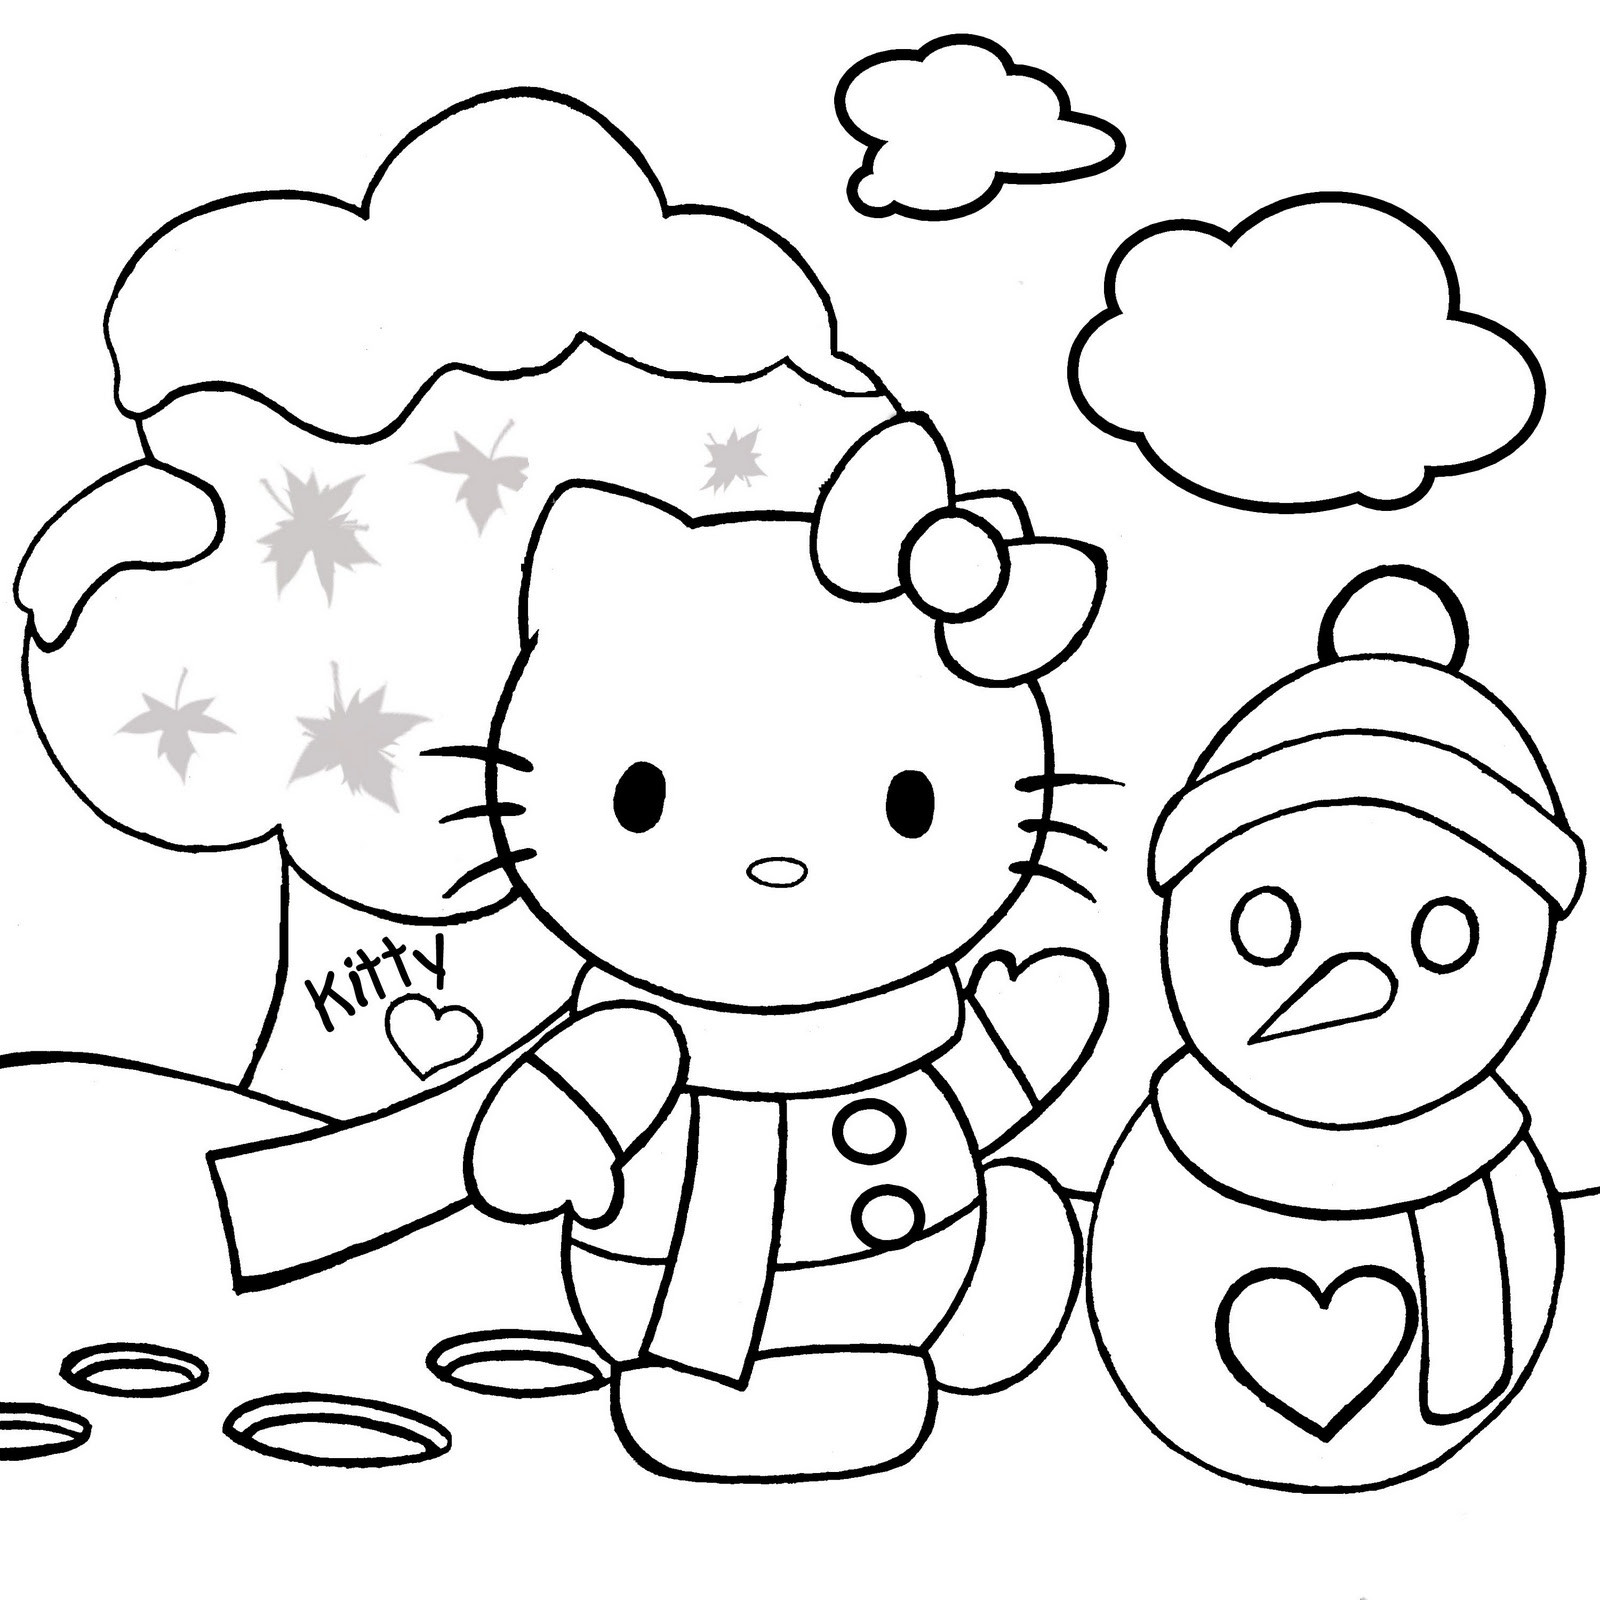 Kids Christmas Coloring Pages
 Hello Kitty Christmas Coloring Pages 1